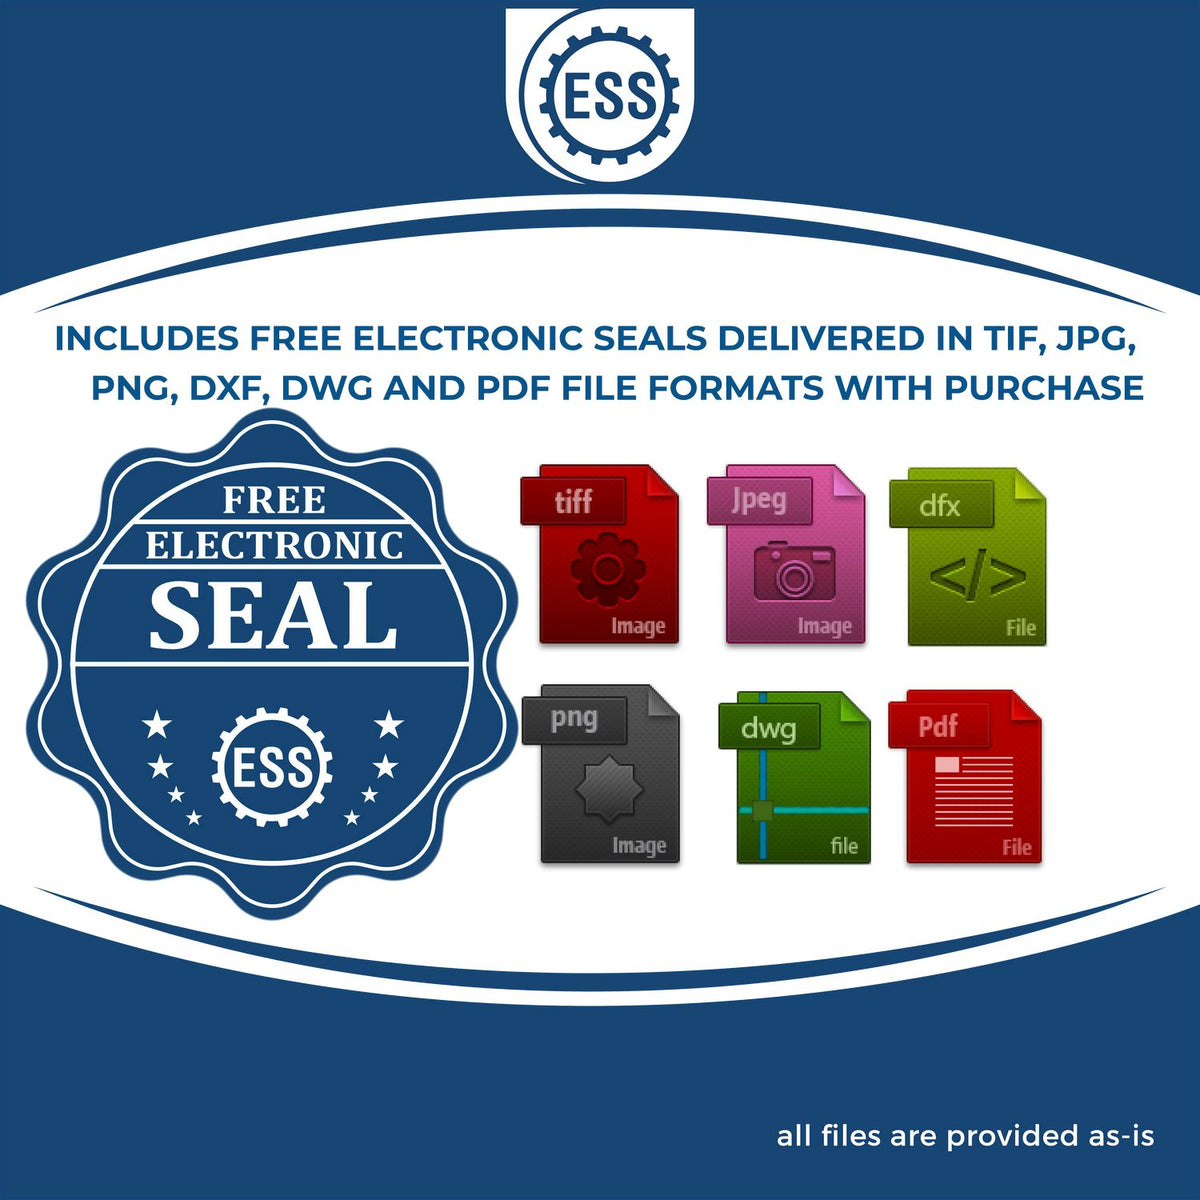 An infographic for the free electronic seal for the Premium MaxLight Pre-Inked Mississippi Geology Stamp illustrating the different file type icons such as DXF, DWG, TIF, JPG and PNG.